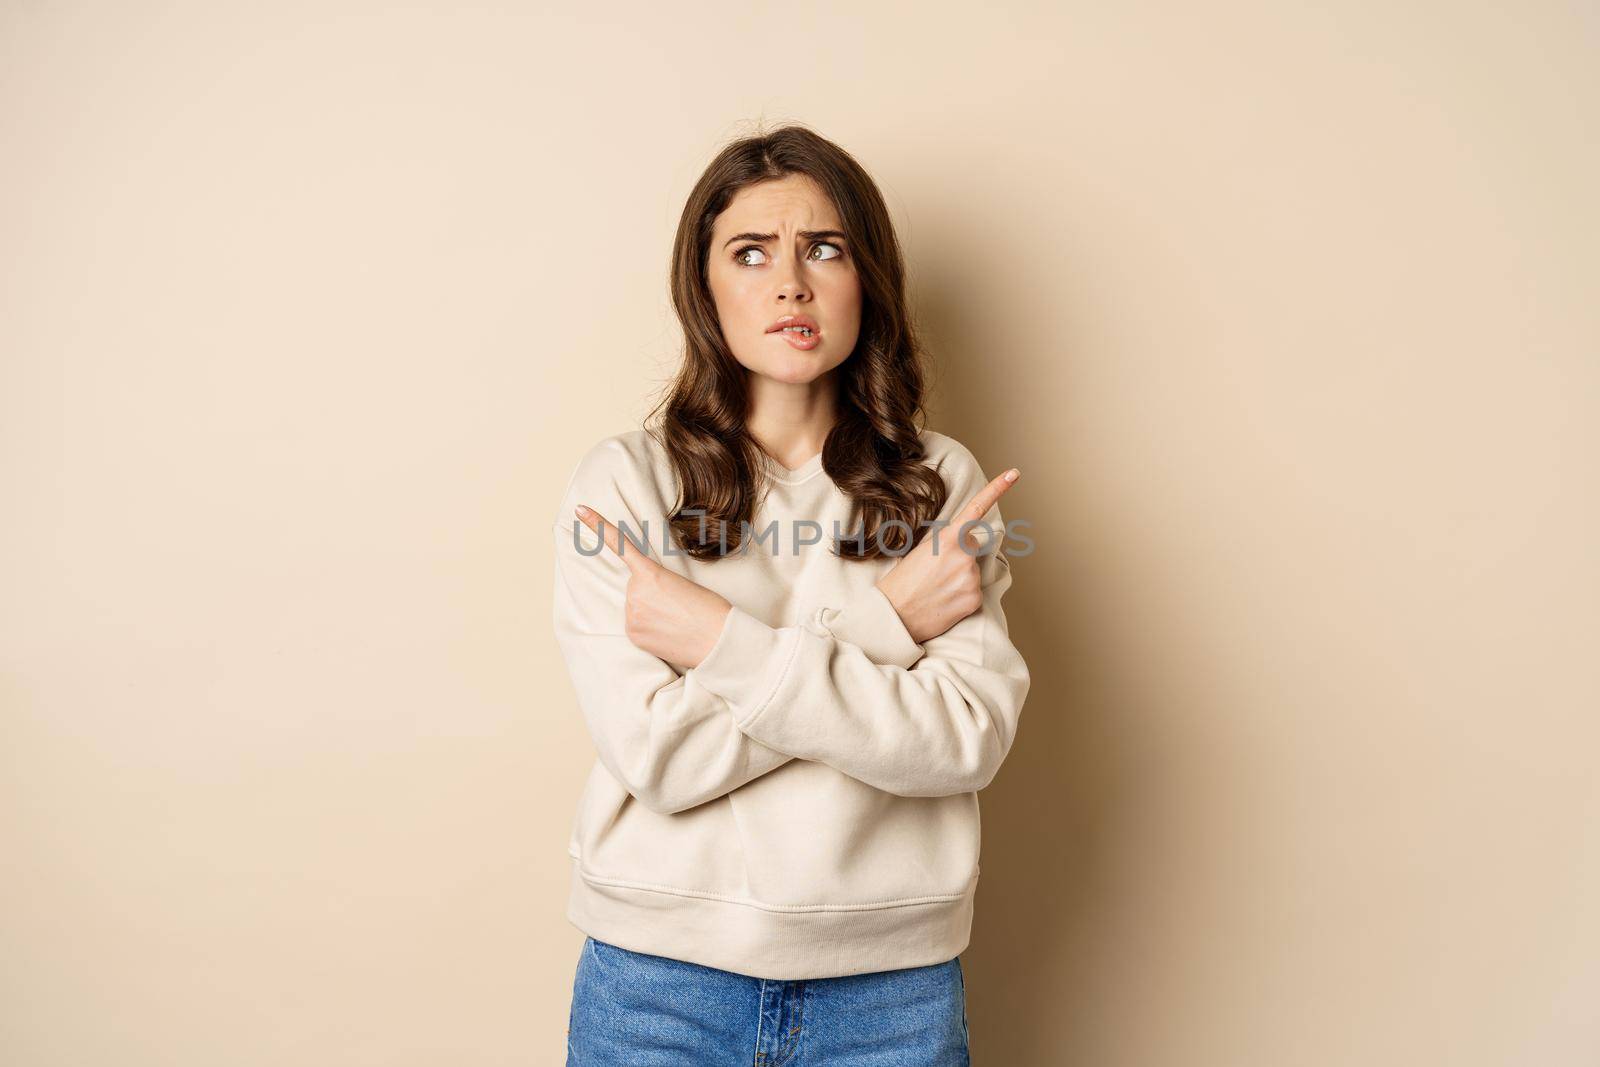 Complicated and indecisive woman pointing sideways, cant make choice, struggle with decision, choosing between two options, standing over beige background.